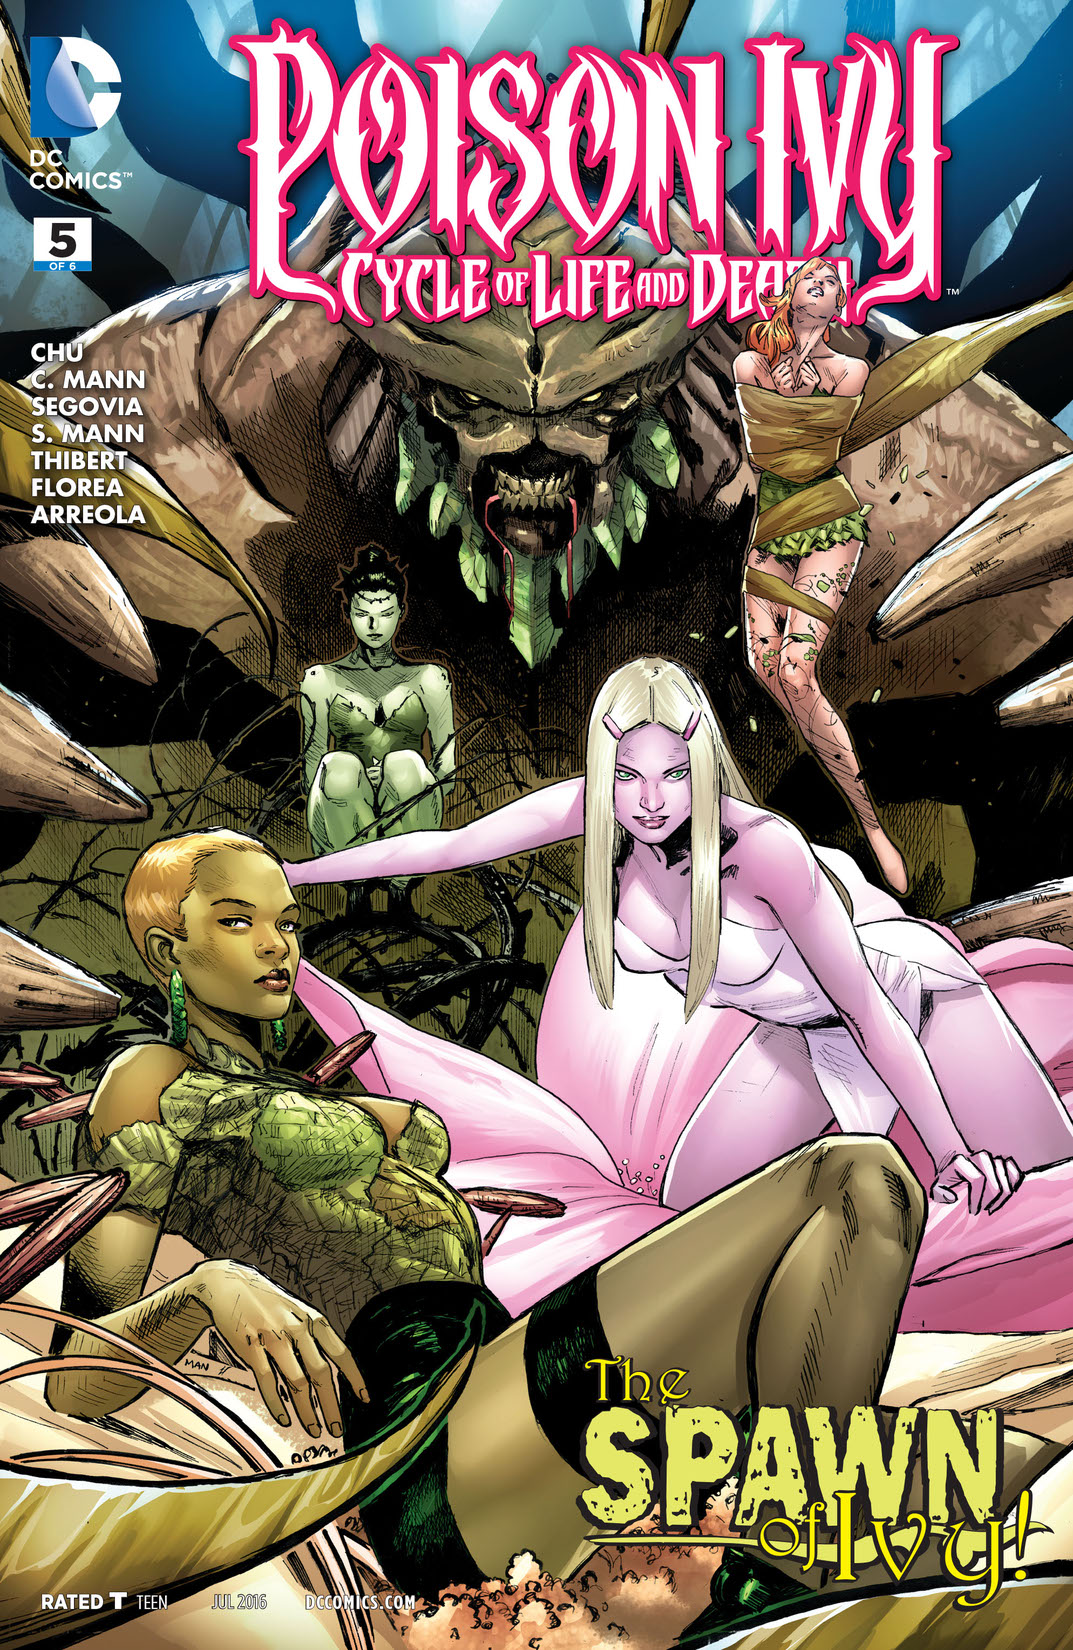 Poison Ivy: Cycle of Life and Death #5 preview images